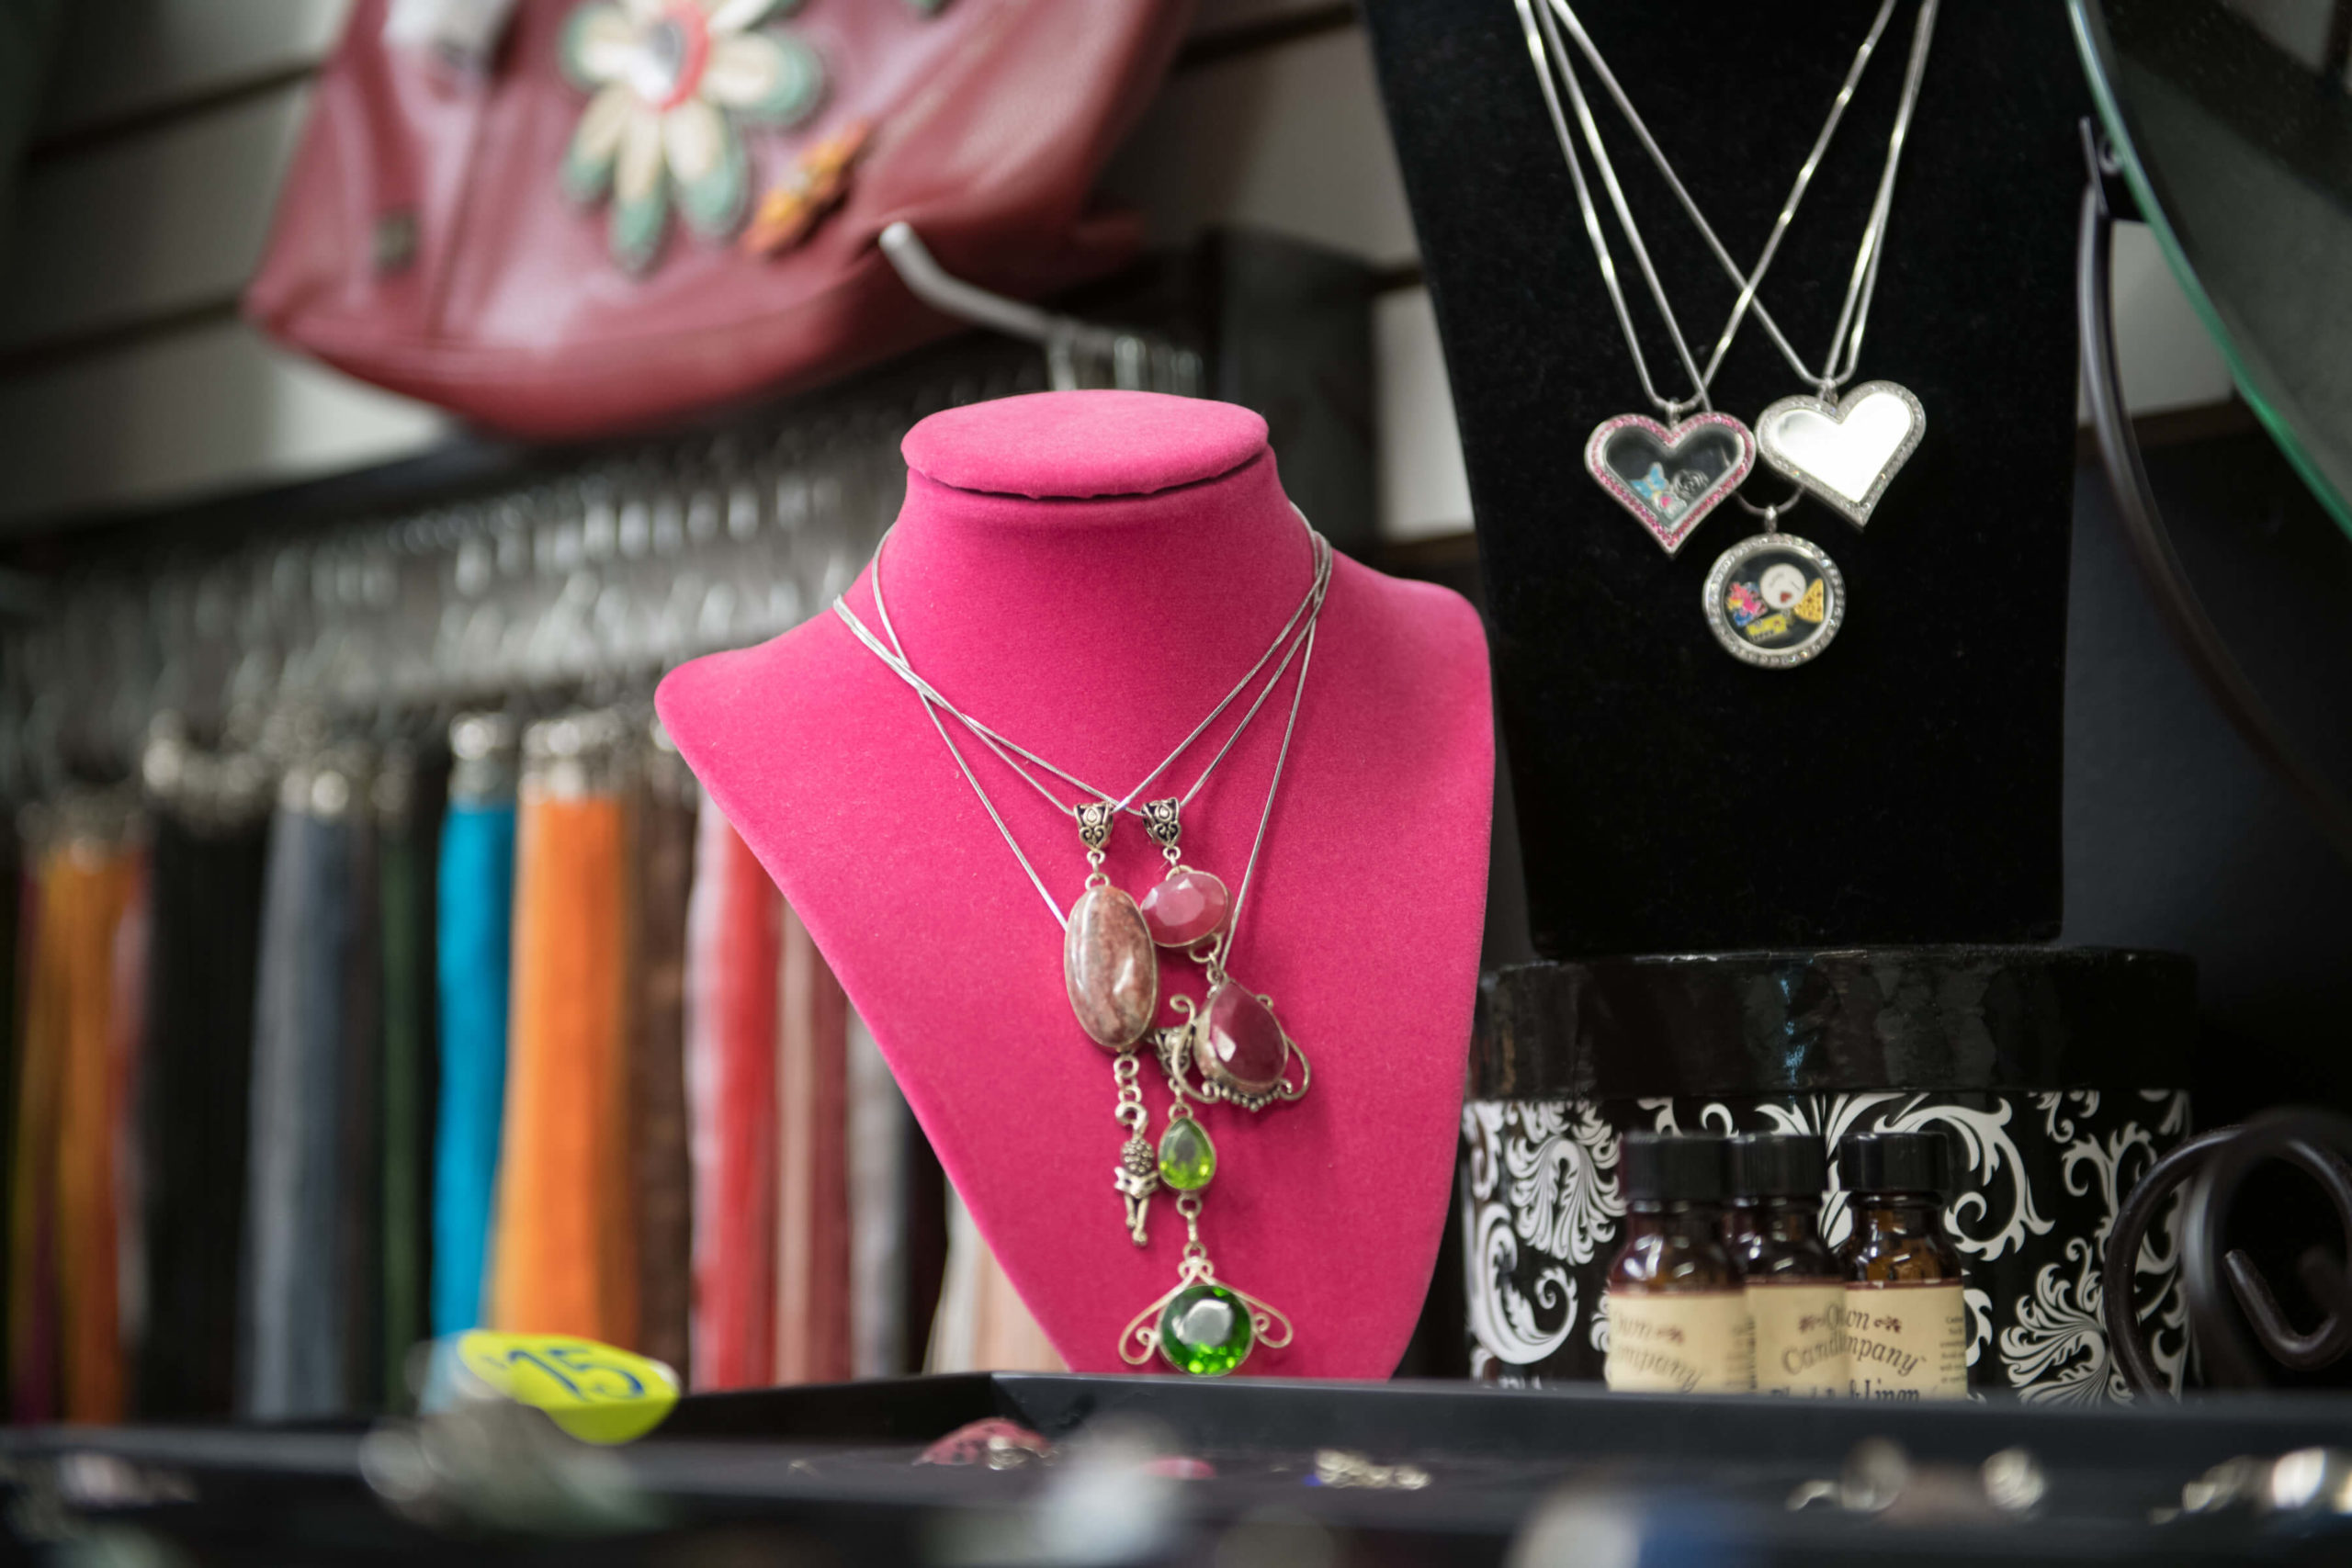 A beautiful handcrafted necklace is on display at a jewelry stand at The Markets.